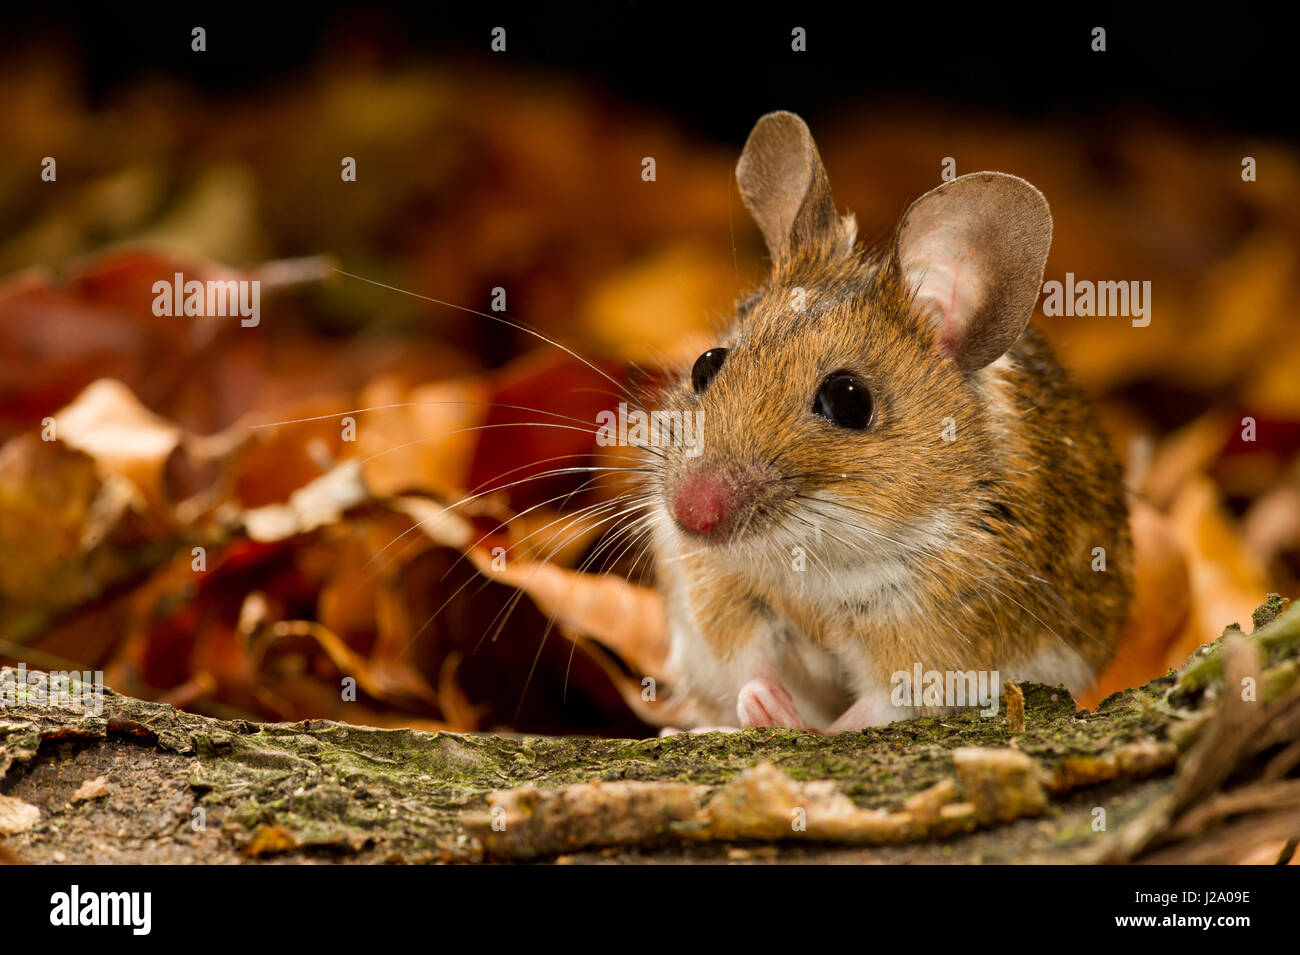 The Yellow-necked Mouse Apodemus flavicollis is closely related to the wood mouse, with which it was long confused, only being recognised as a separate species in 1894. It differs in its band of yellow fur around the neck and in having slightly larger ears and usually being slightly larger overall. Around 100mm in length, it can climb trees and sometimes overwinters in houses. It is found mostly in mountainous areas of southern Europe, but extends north into parts of Scandinavia and Britain. Stock Photo